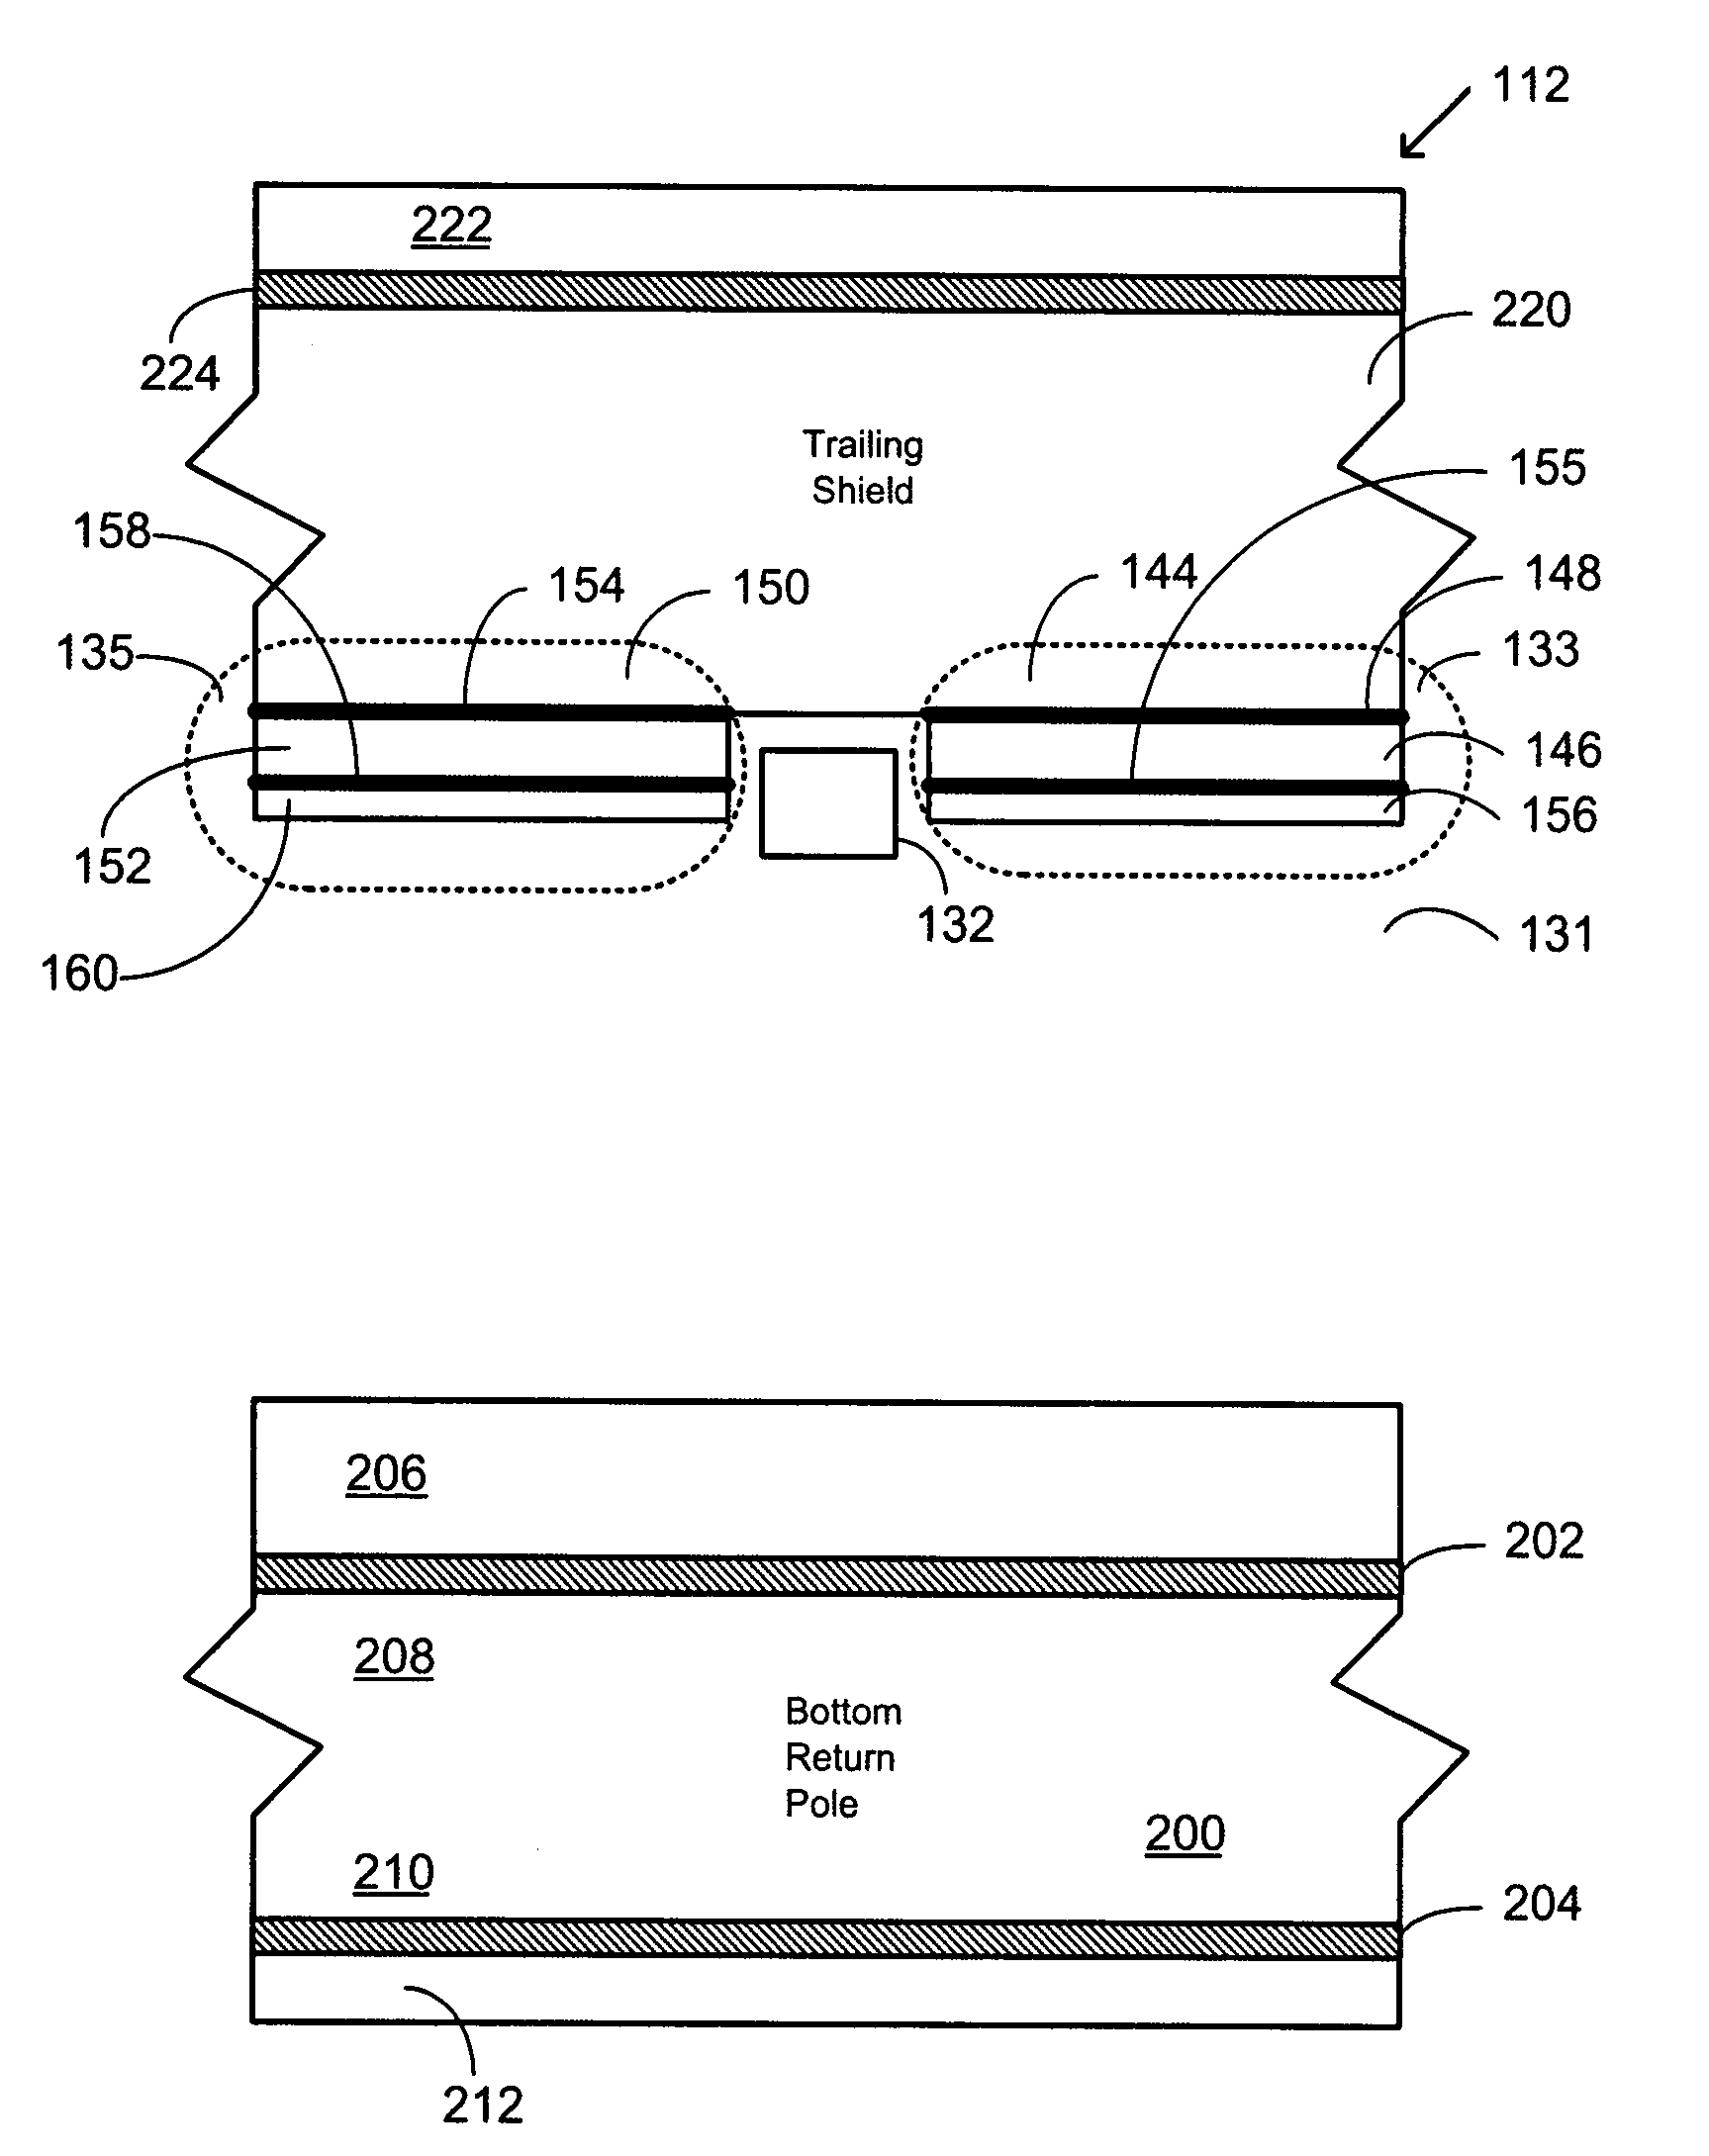 Laminated side shield for perpendicular write head for improved performance